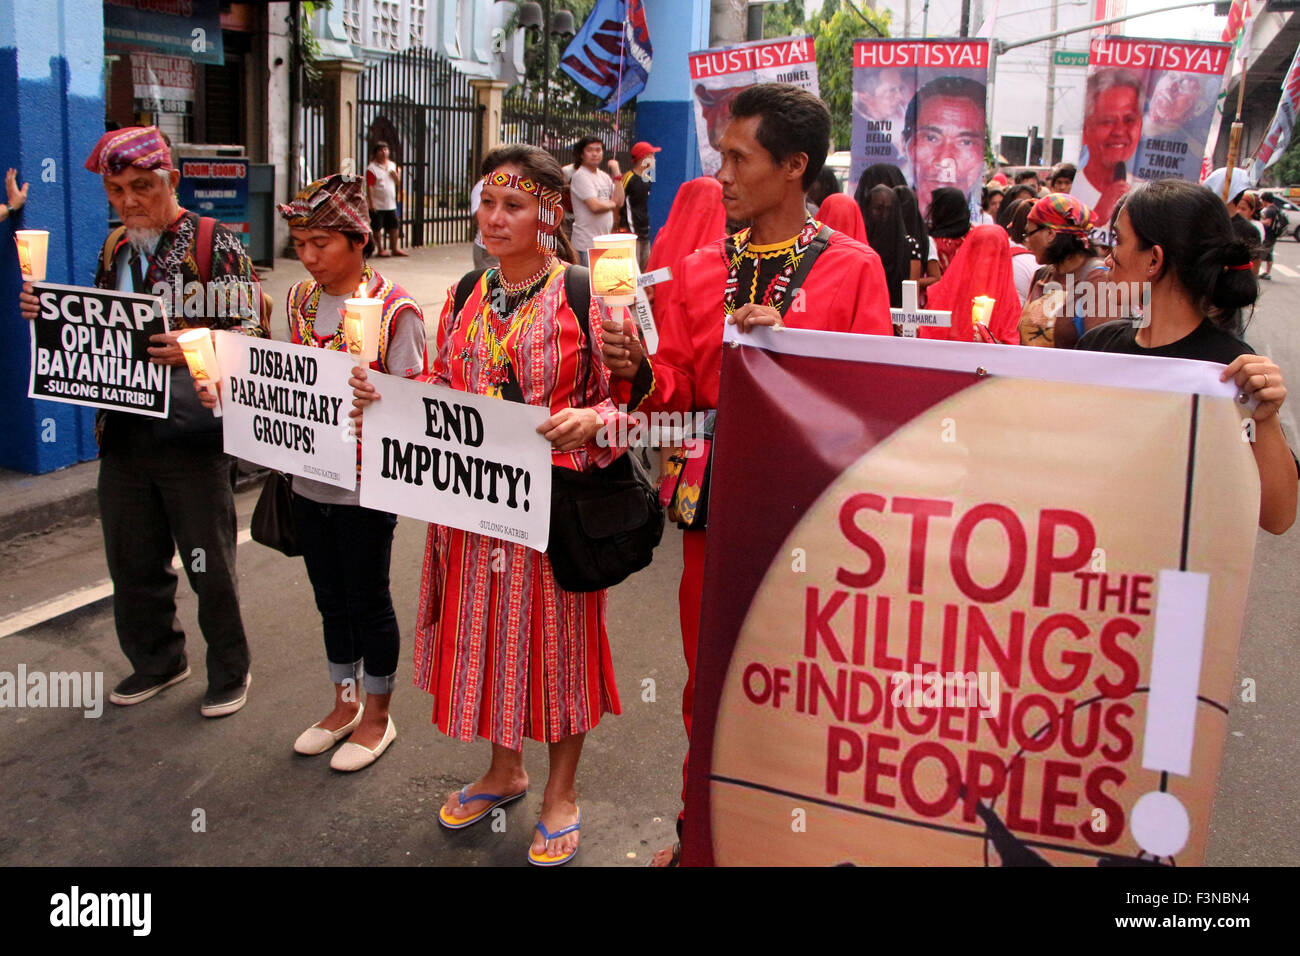 In remembering the 40th day of Lianga, Surigao Del Sur Massacre of Lumads various groups lead by KATRIBU, march to Mendiola wearing red and black veils and carrying torches and candles, calling for justice and to end the cultural impunity under the so-called 'righteous path' and counter -insurgency Oplan Bayanihan of the Pres. Aquino regime. The United Nation's Rapporteur on Internally Displaced Persons, Dr. Chaloka Beyani visited the displaced lumad peoples in Haran Center in Davao City where he expressed concerned over militarization of lumads communities that resulted to human right viola Stock Photo